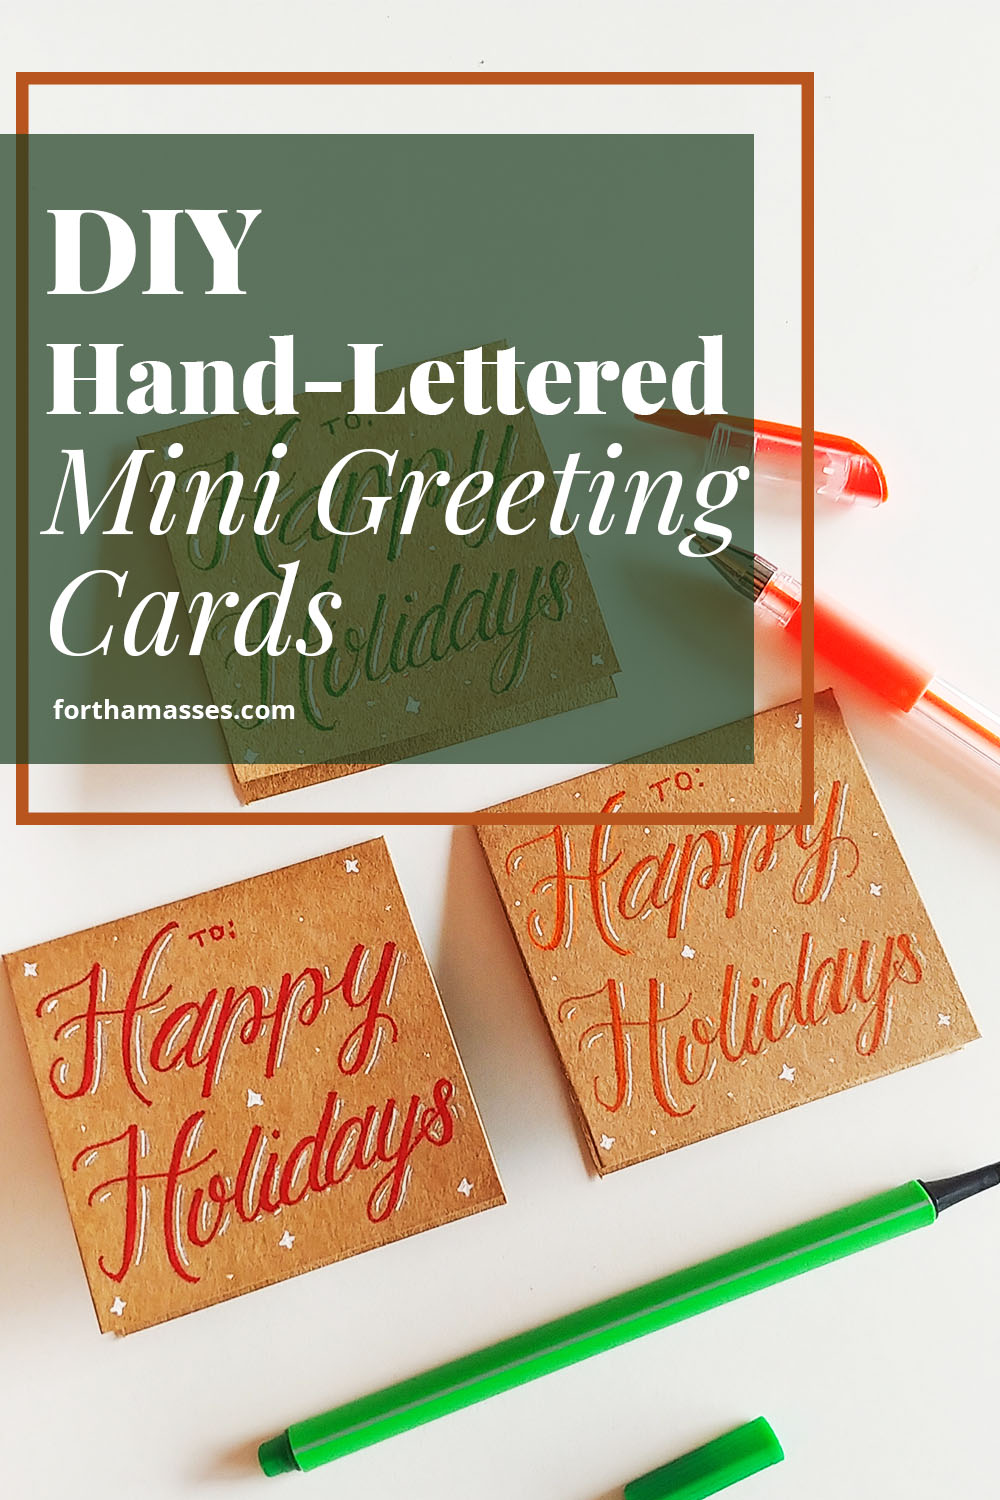 DIY Hand lettered mini greeting cards